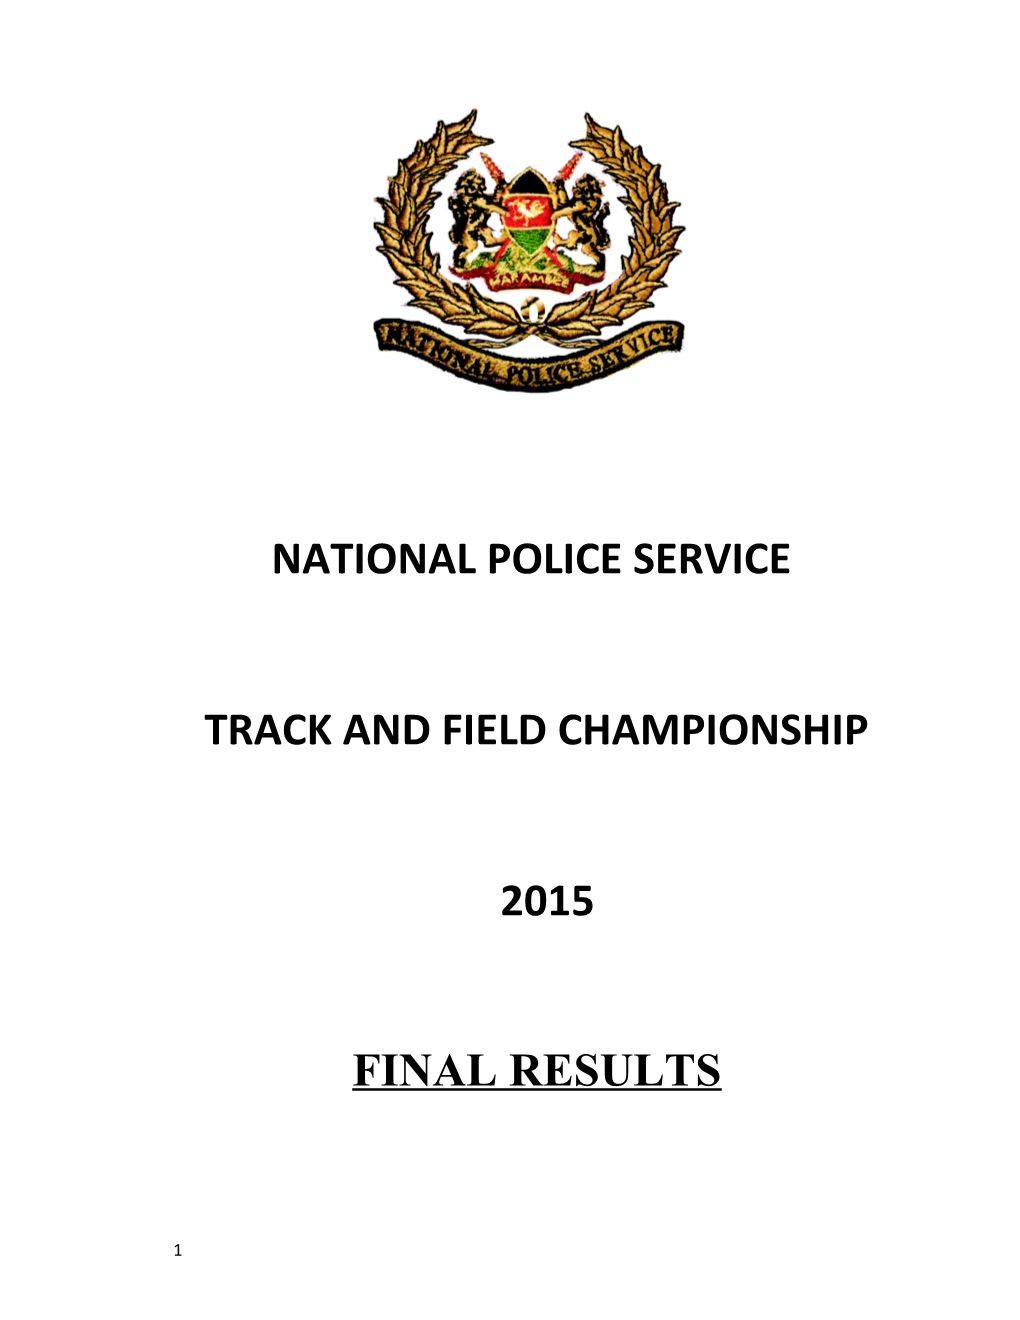 Track and Field Championship